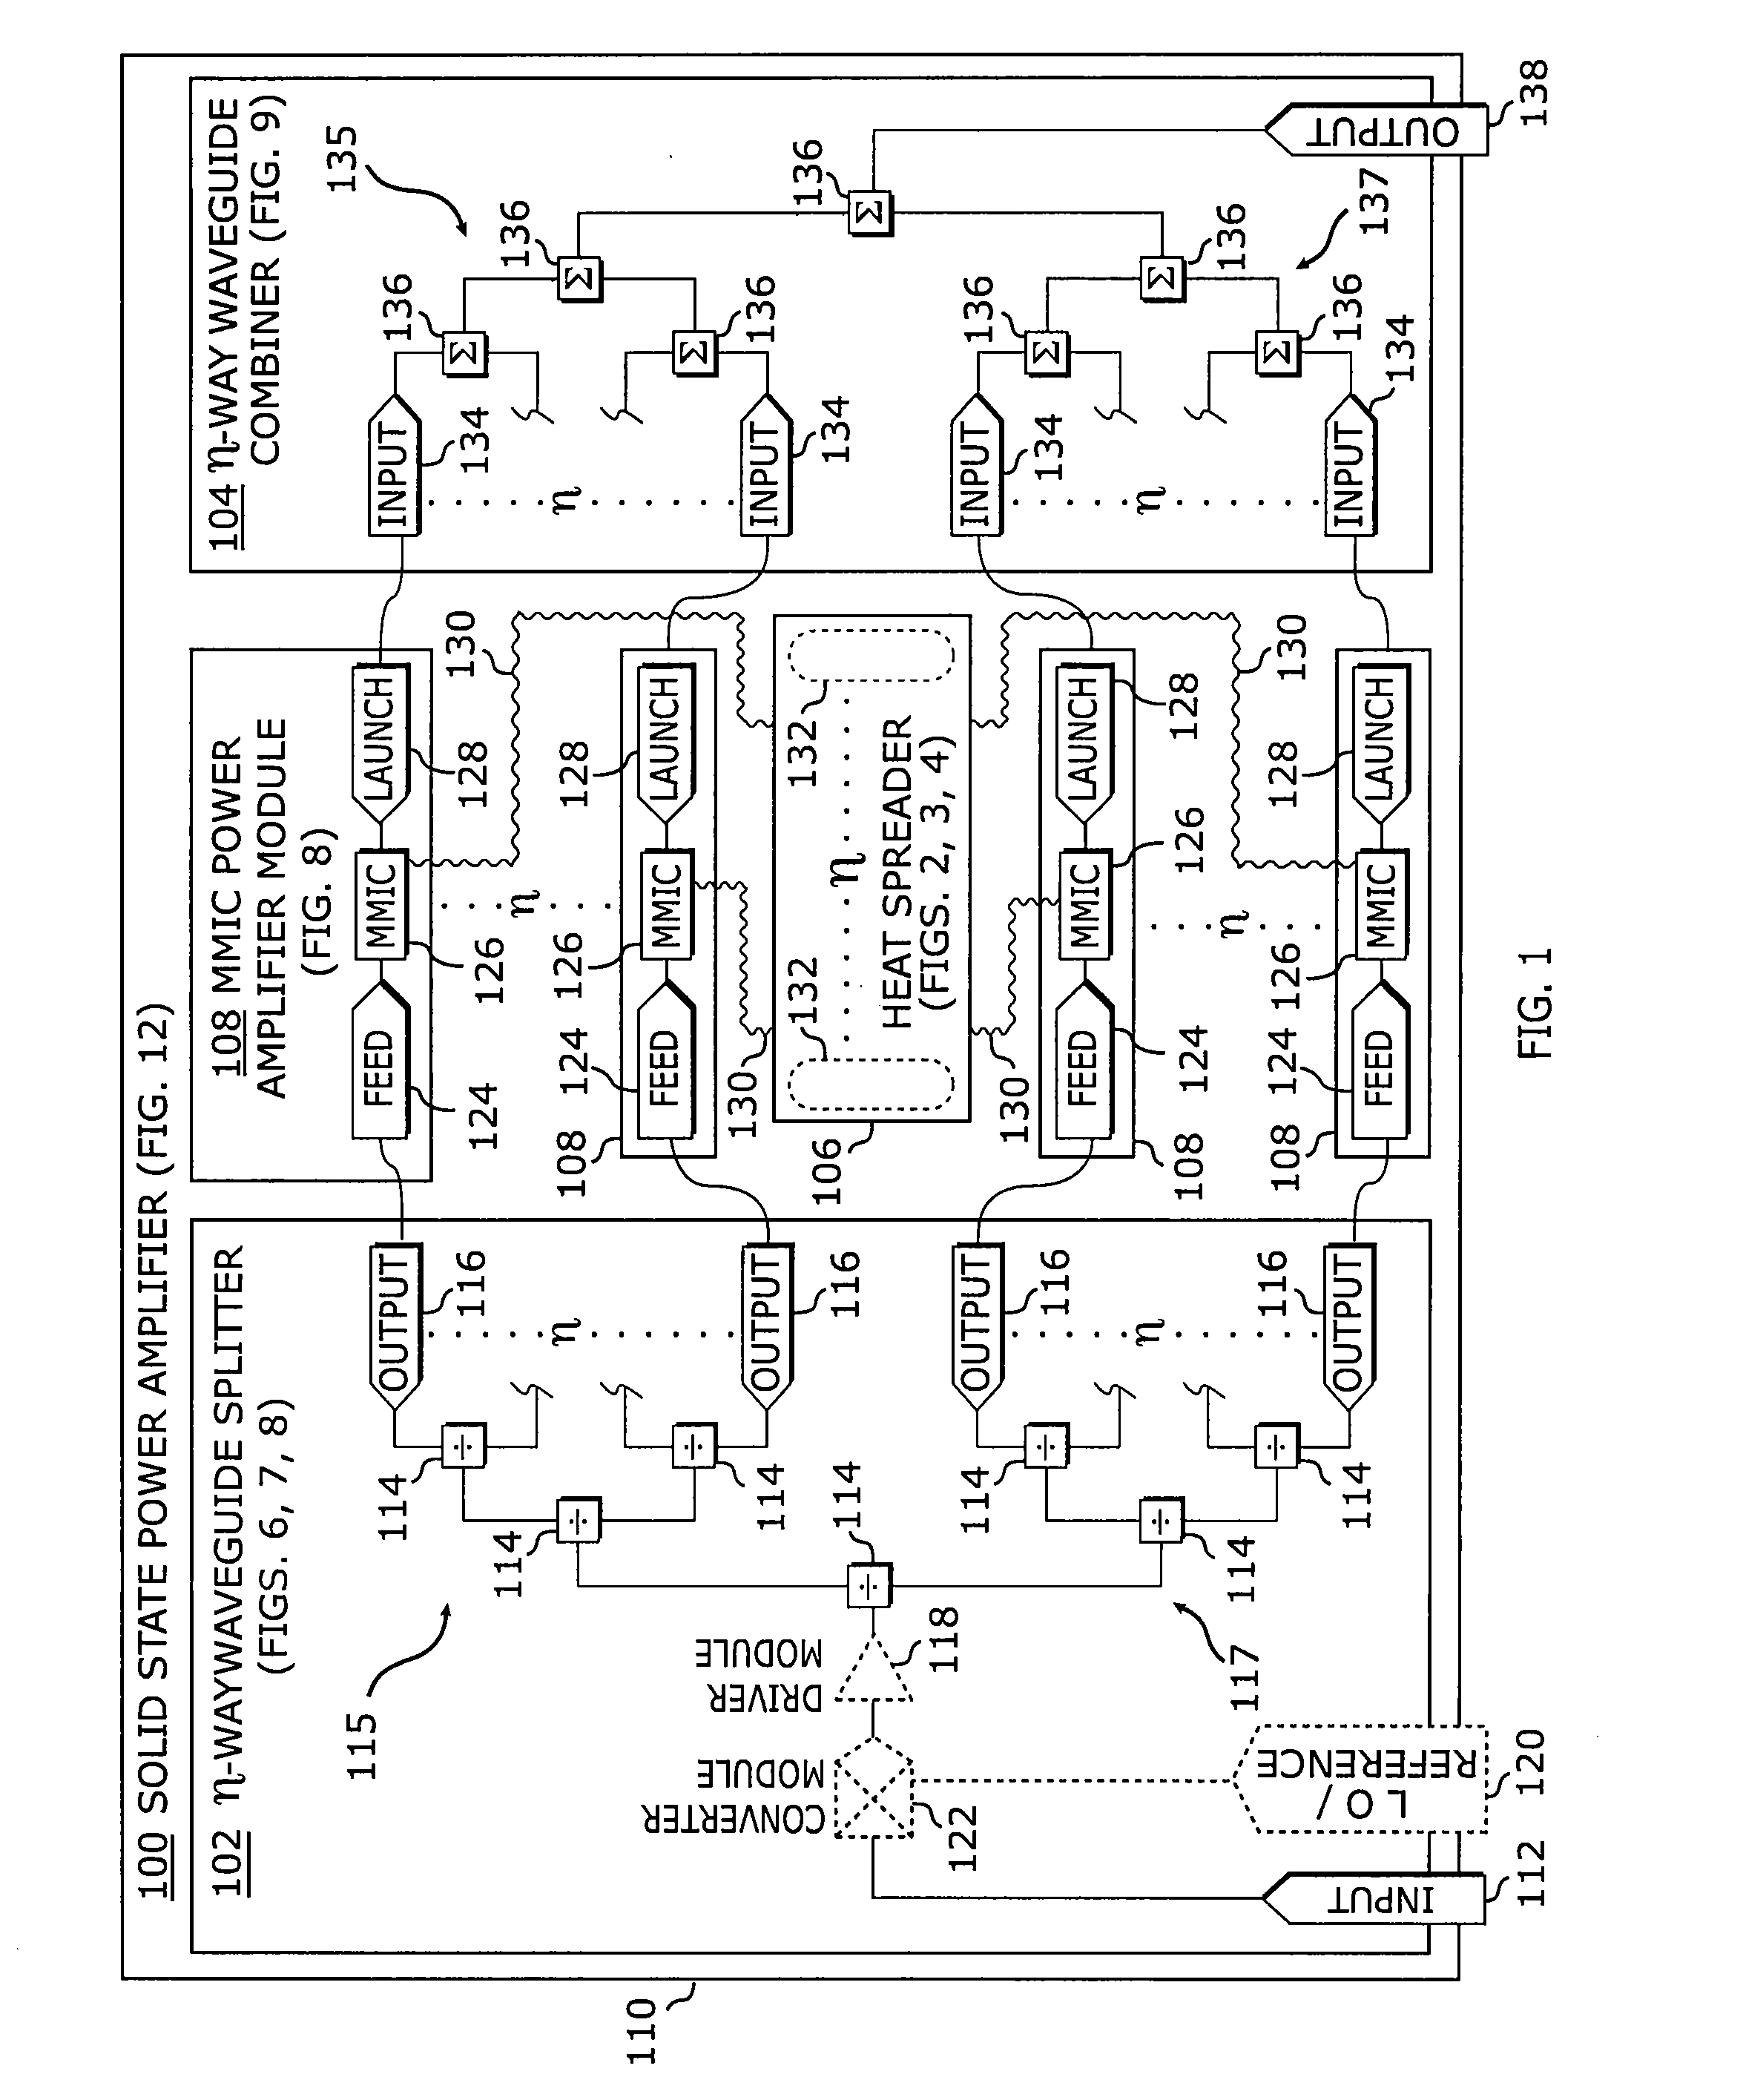 Solid state power amplifier with multi-planar mmic modules